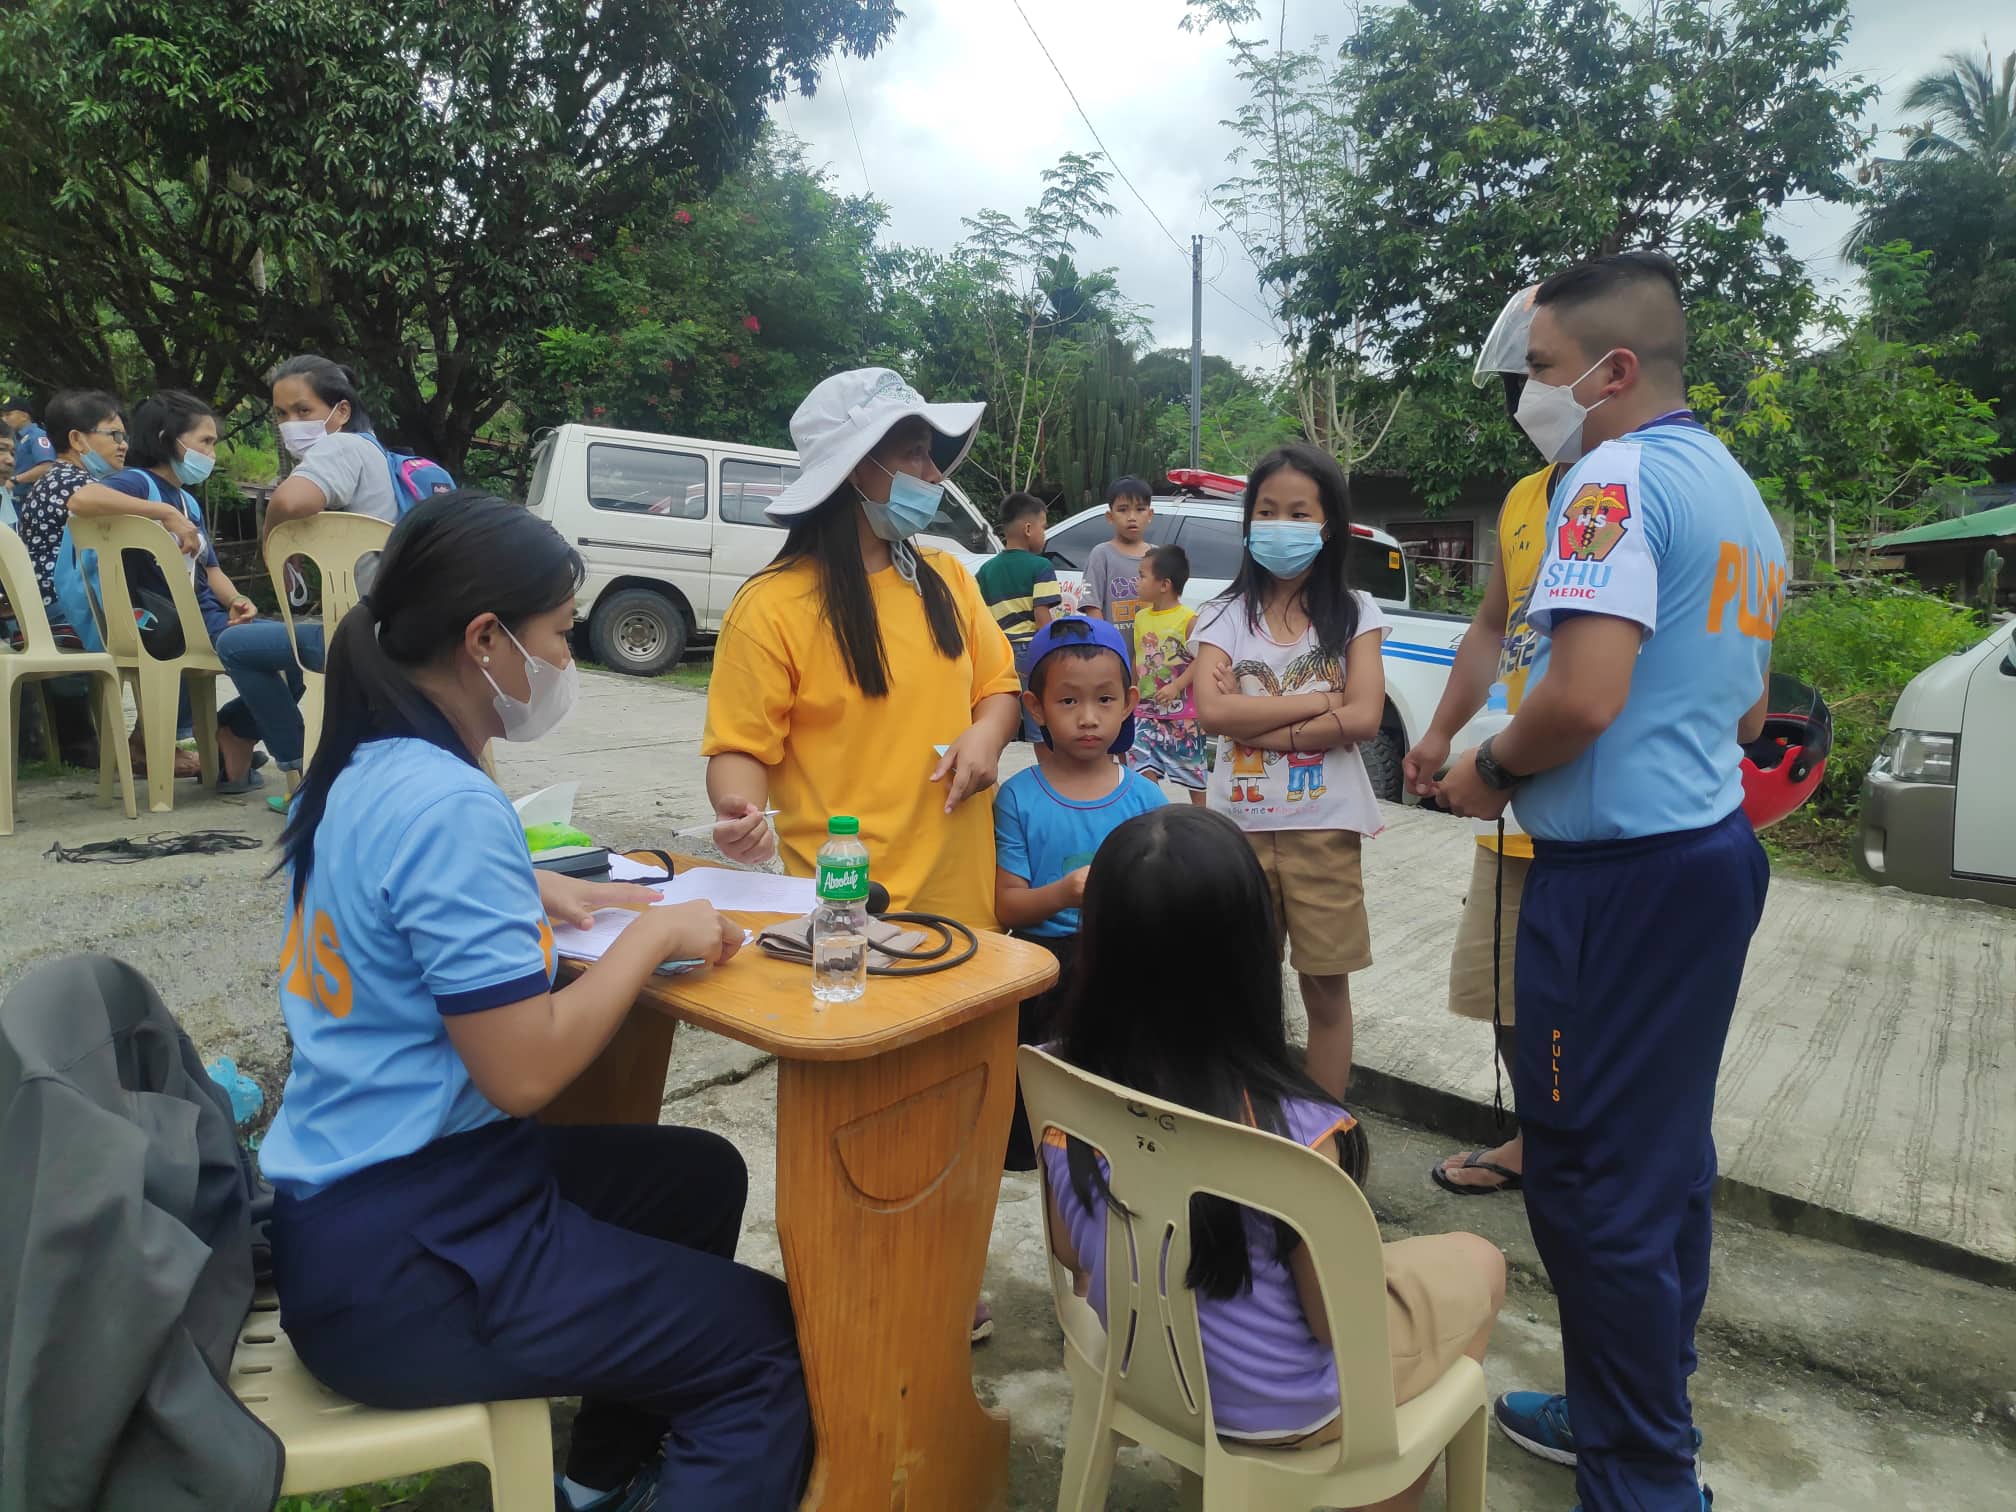 351 BENEFIT FROM BENGUET LGU, BPPO PAGPTD JOINT MEDICAL MISSION IN ITOGON7